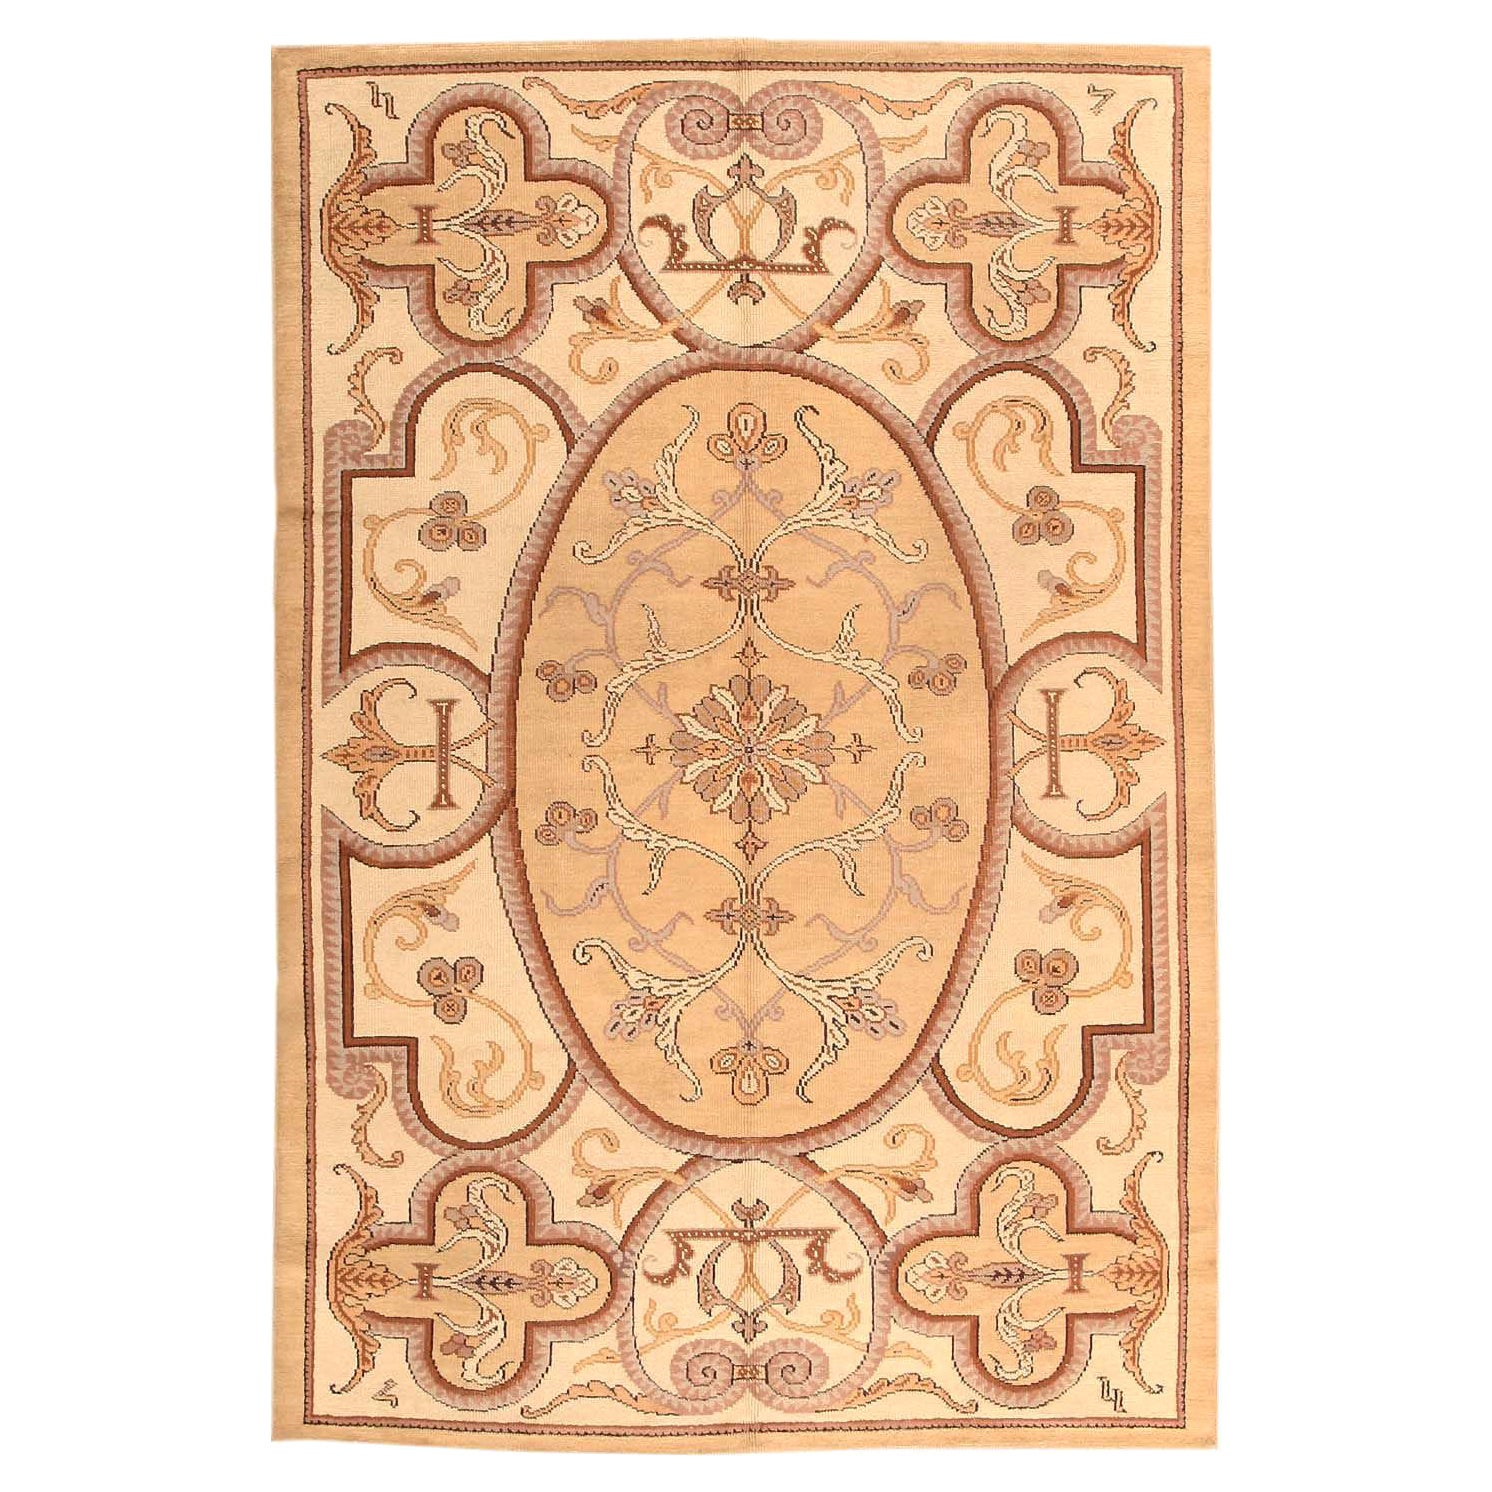 Vintage Art Deco French Rug. Size: 6 ft 4 in x 9 ft 8 in (1.93 m x 2.95 m)